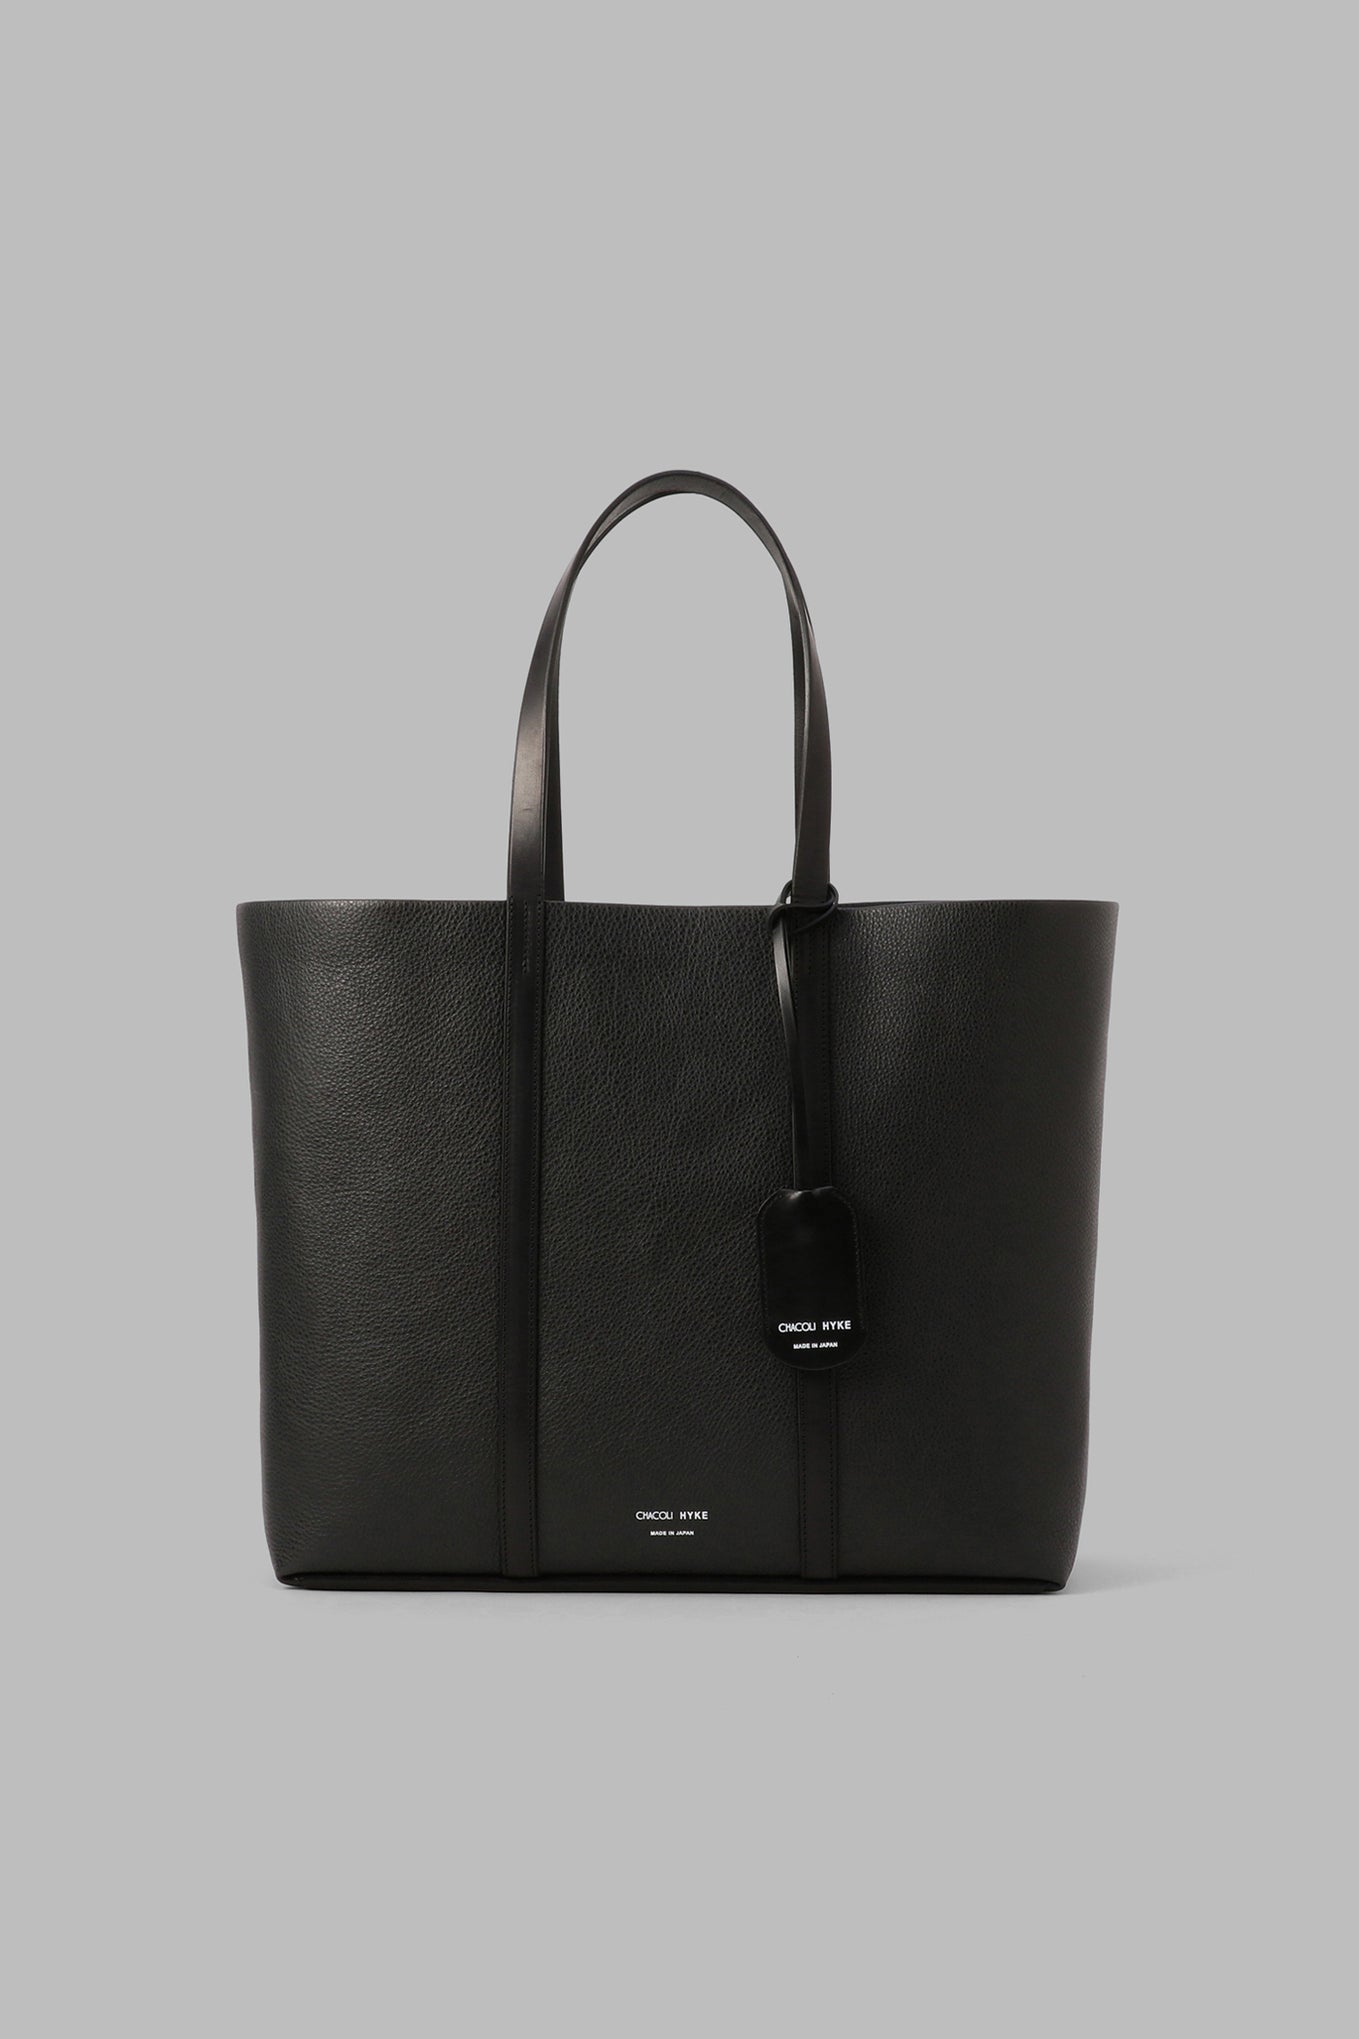 LEATHER TOTE BAG (MEDIUM SIZE)<br>CHACOLI × HYKE